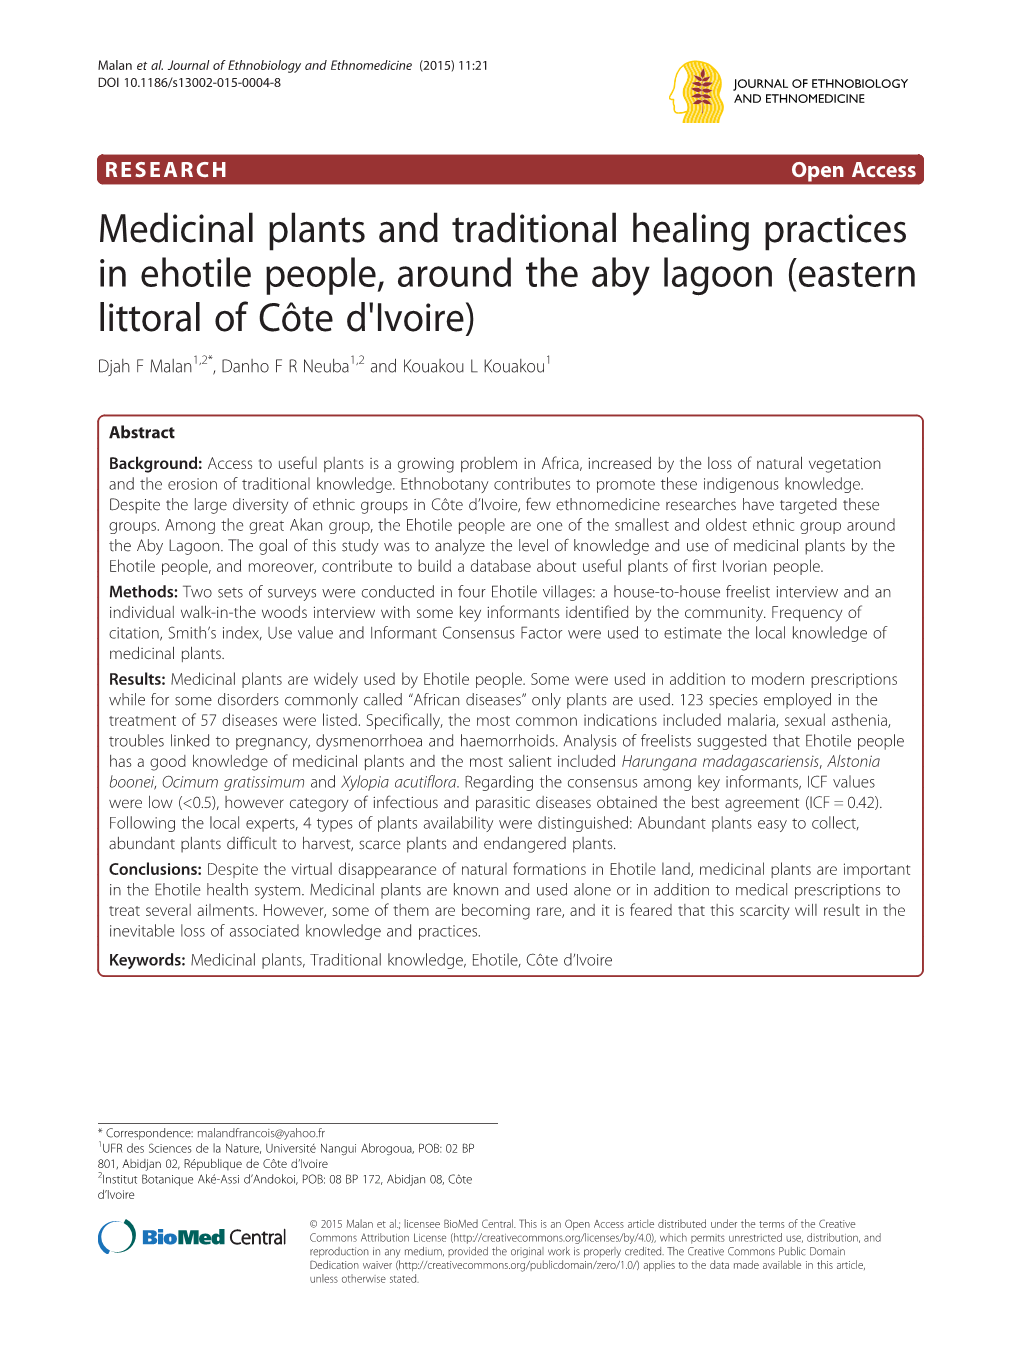 Medicinal Plants and Traditional Healing Practices In